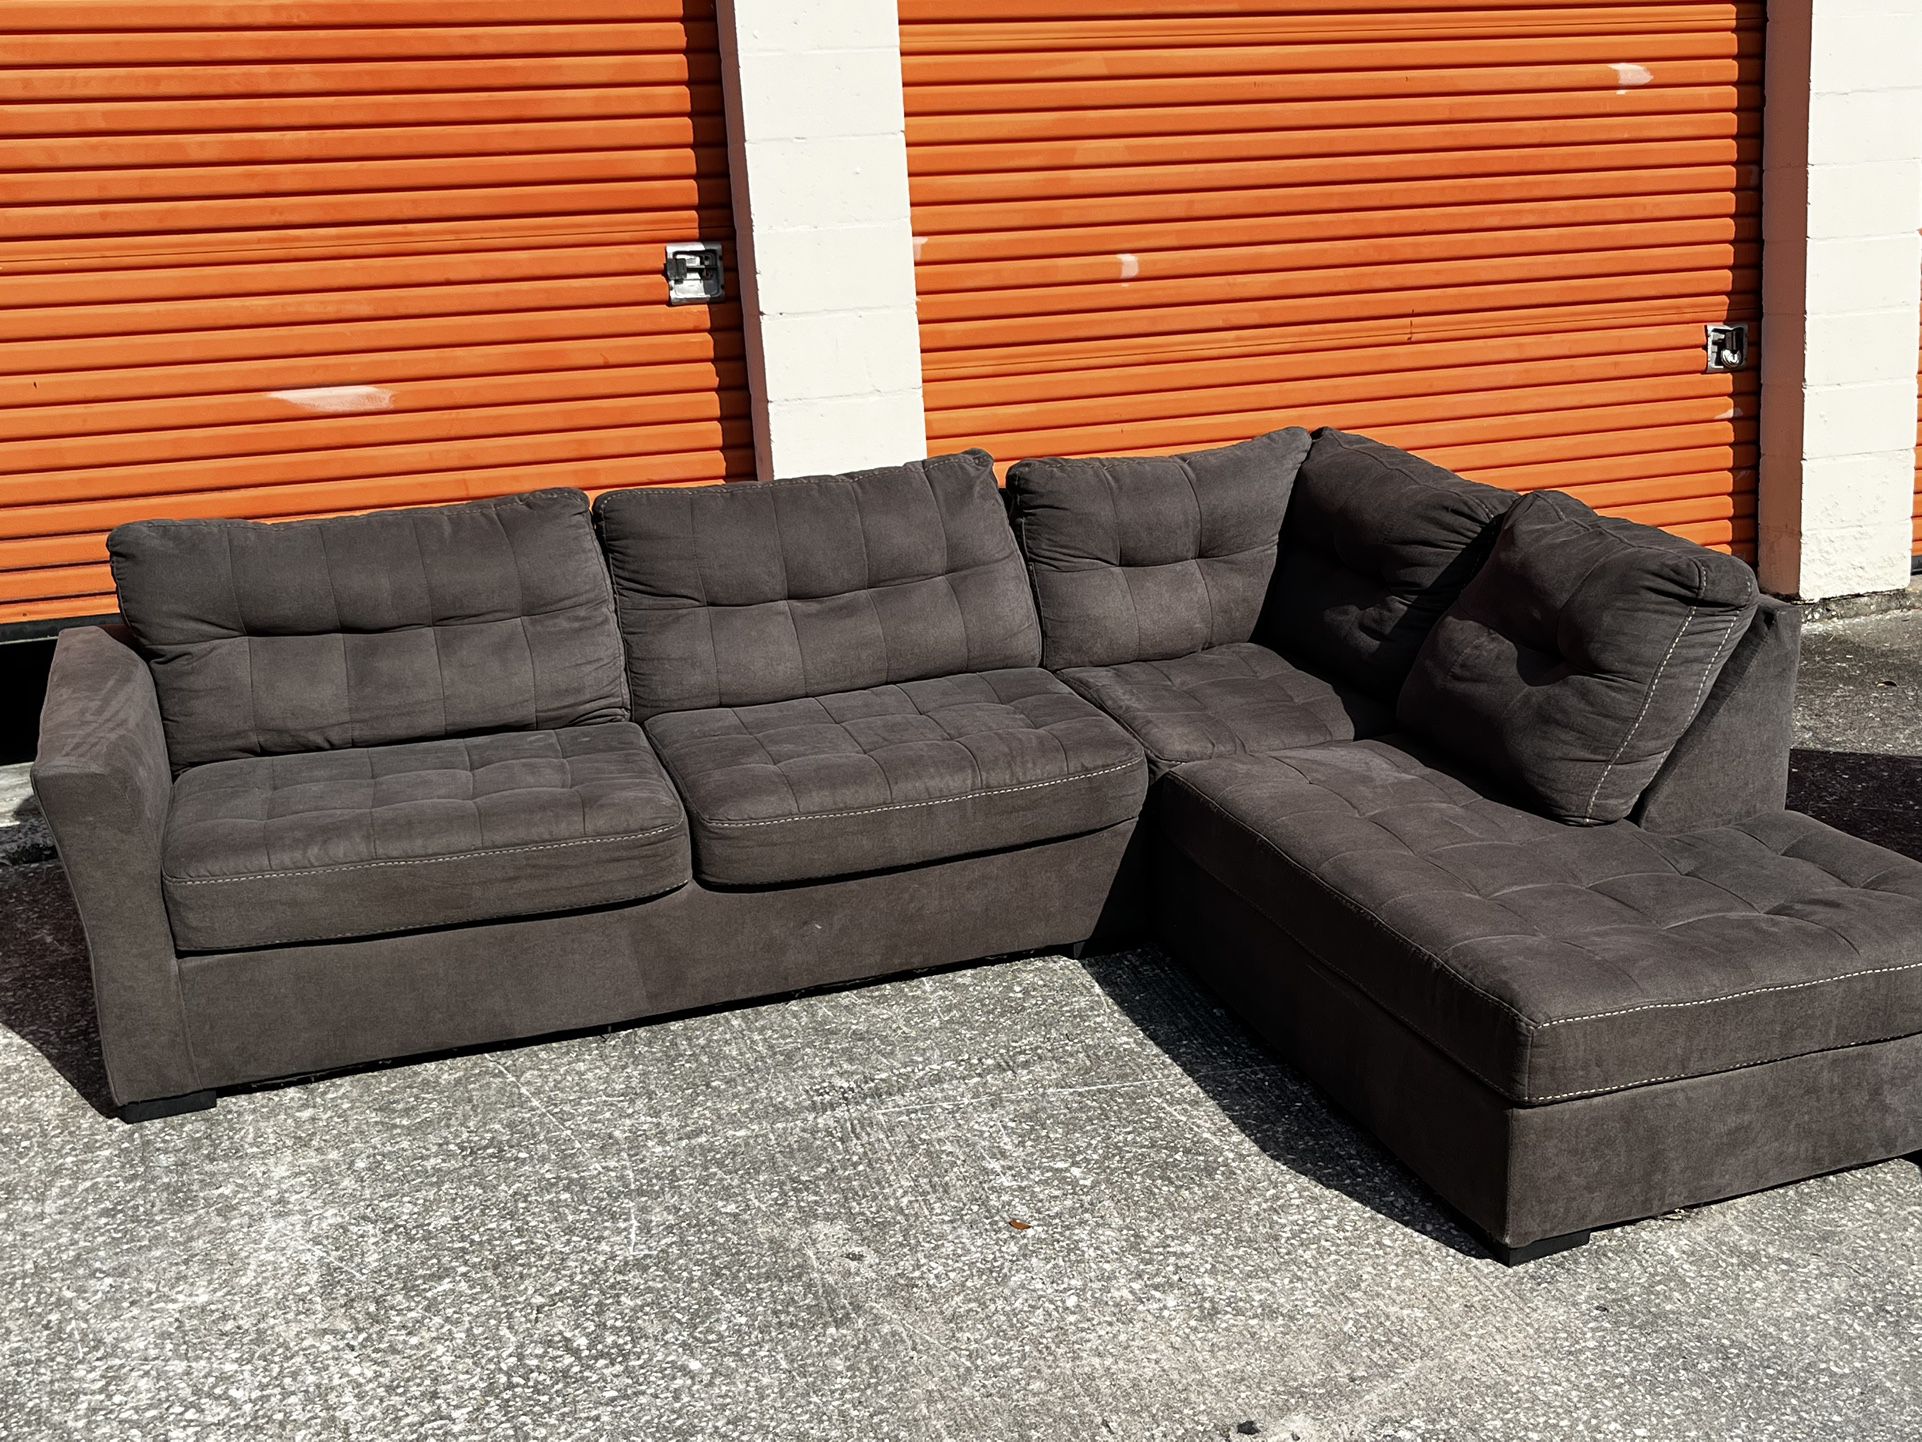 Good Quality Dark Gray Sectional Sofa. Delivery Available!